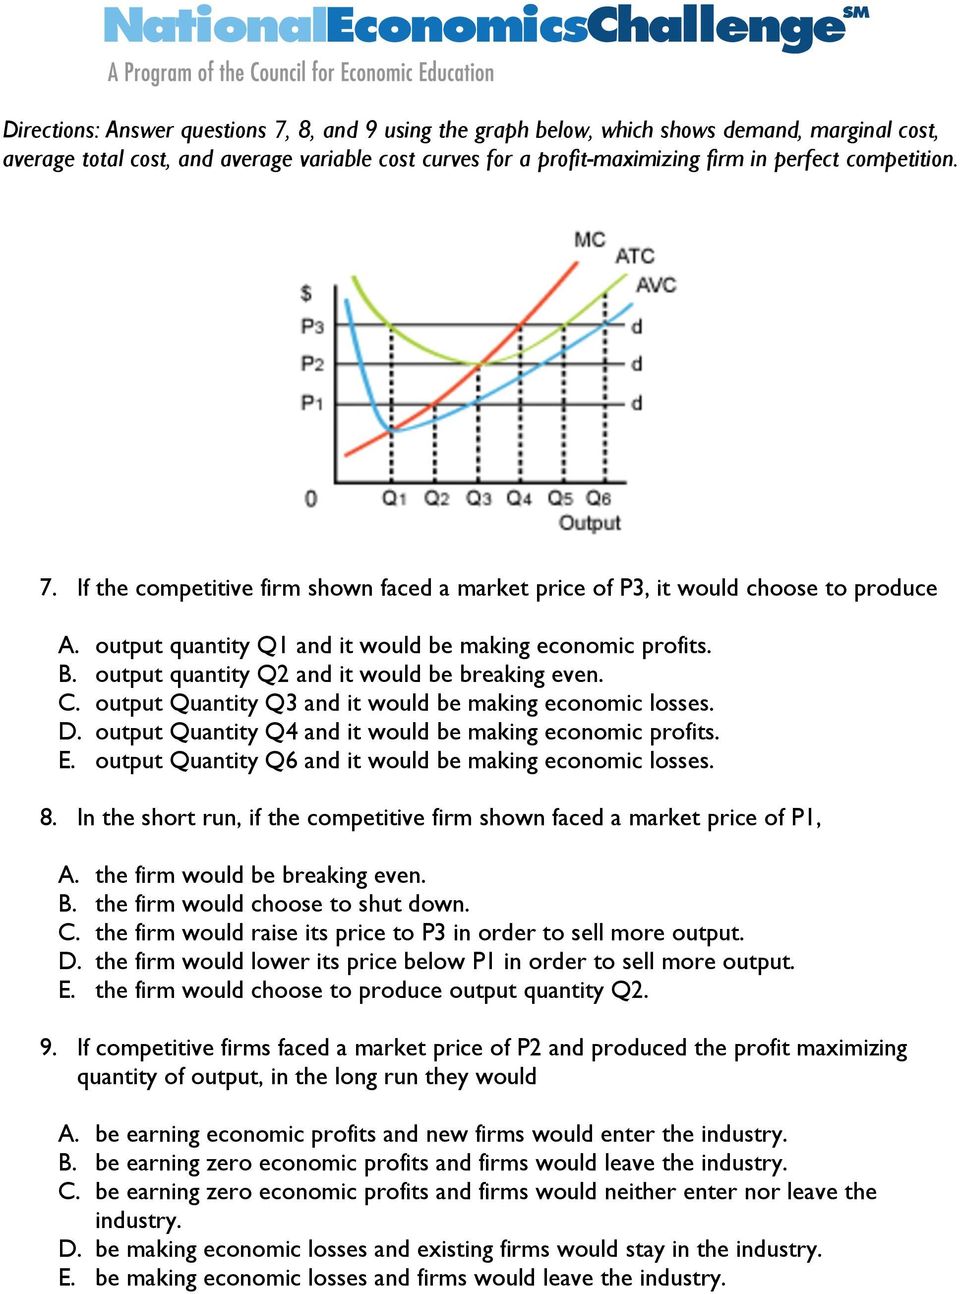 output quantity Q2 and it would be breaking even. C. output Quantity Q3 and it would be making economic losses. D. output Quantity Q4 and it would be making economic profits. E.